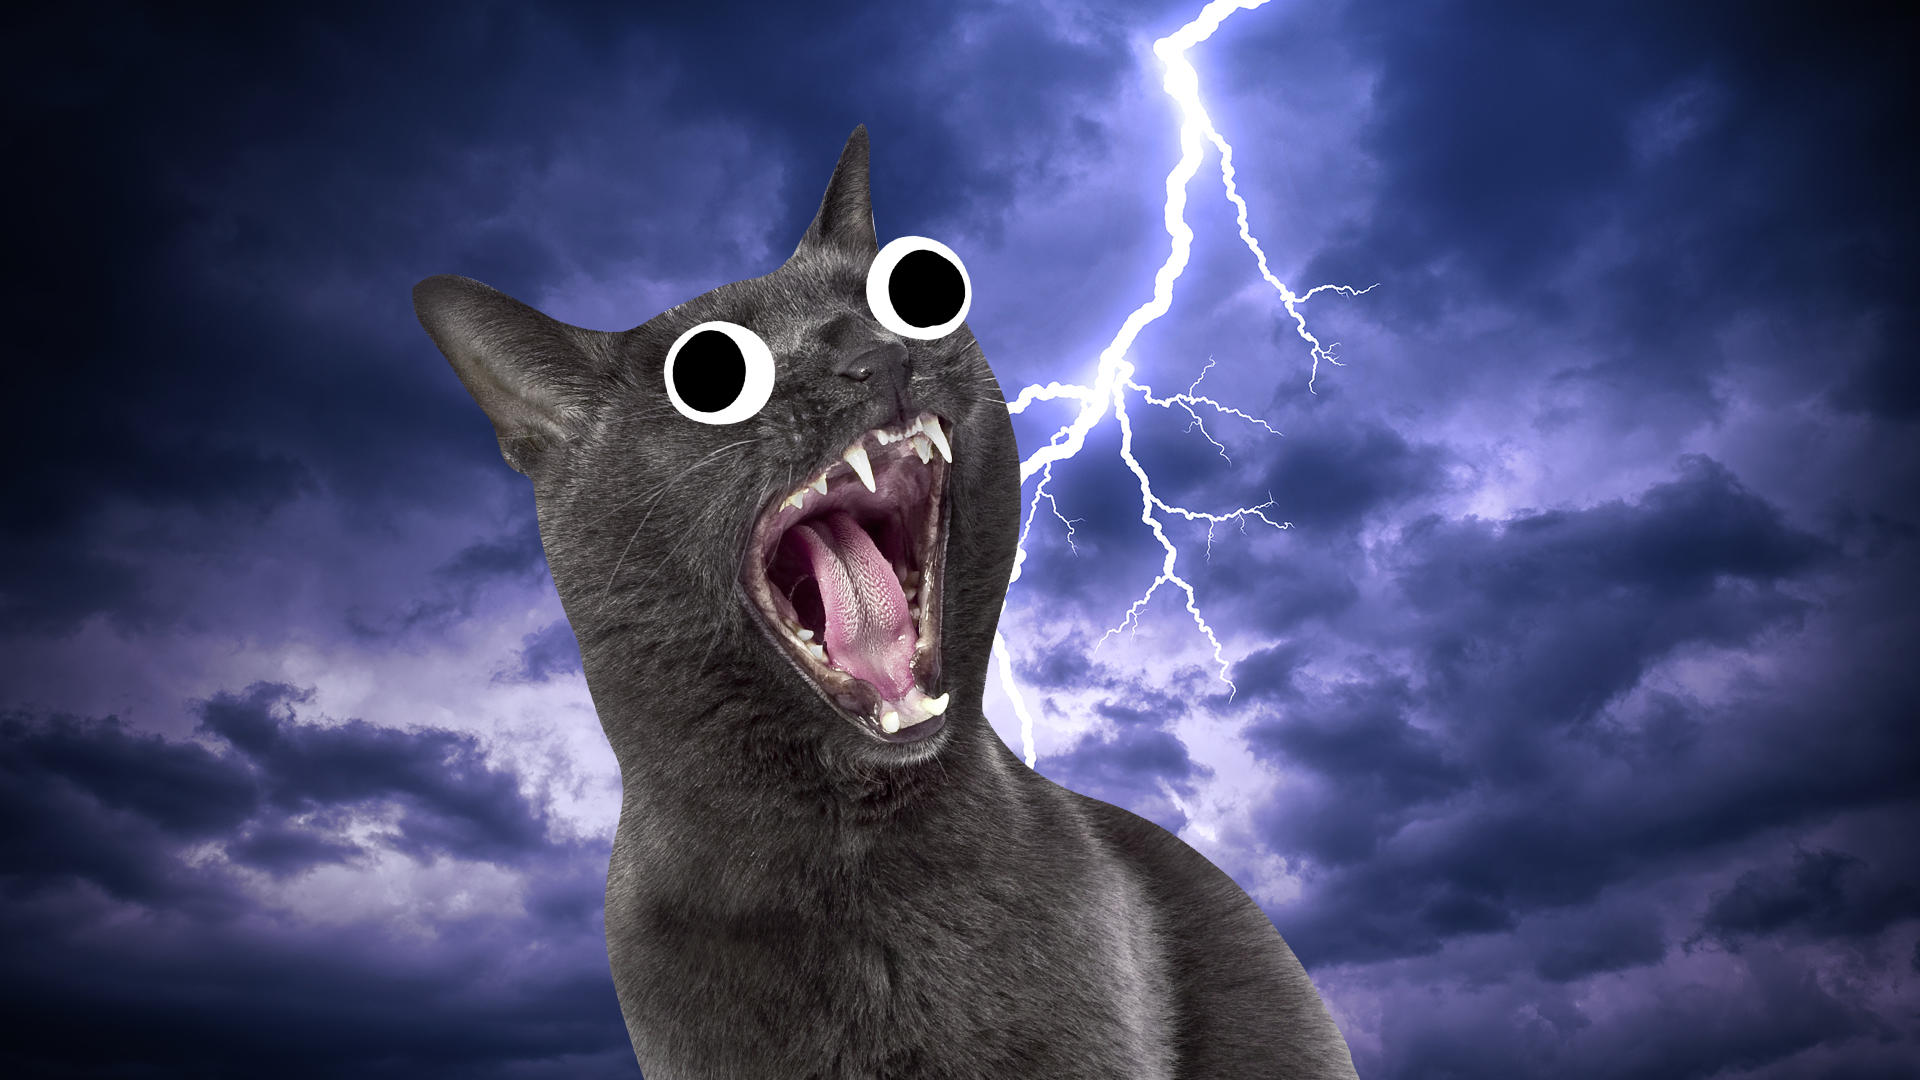 A cat at night with lightning storm in the background